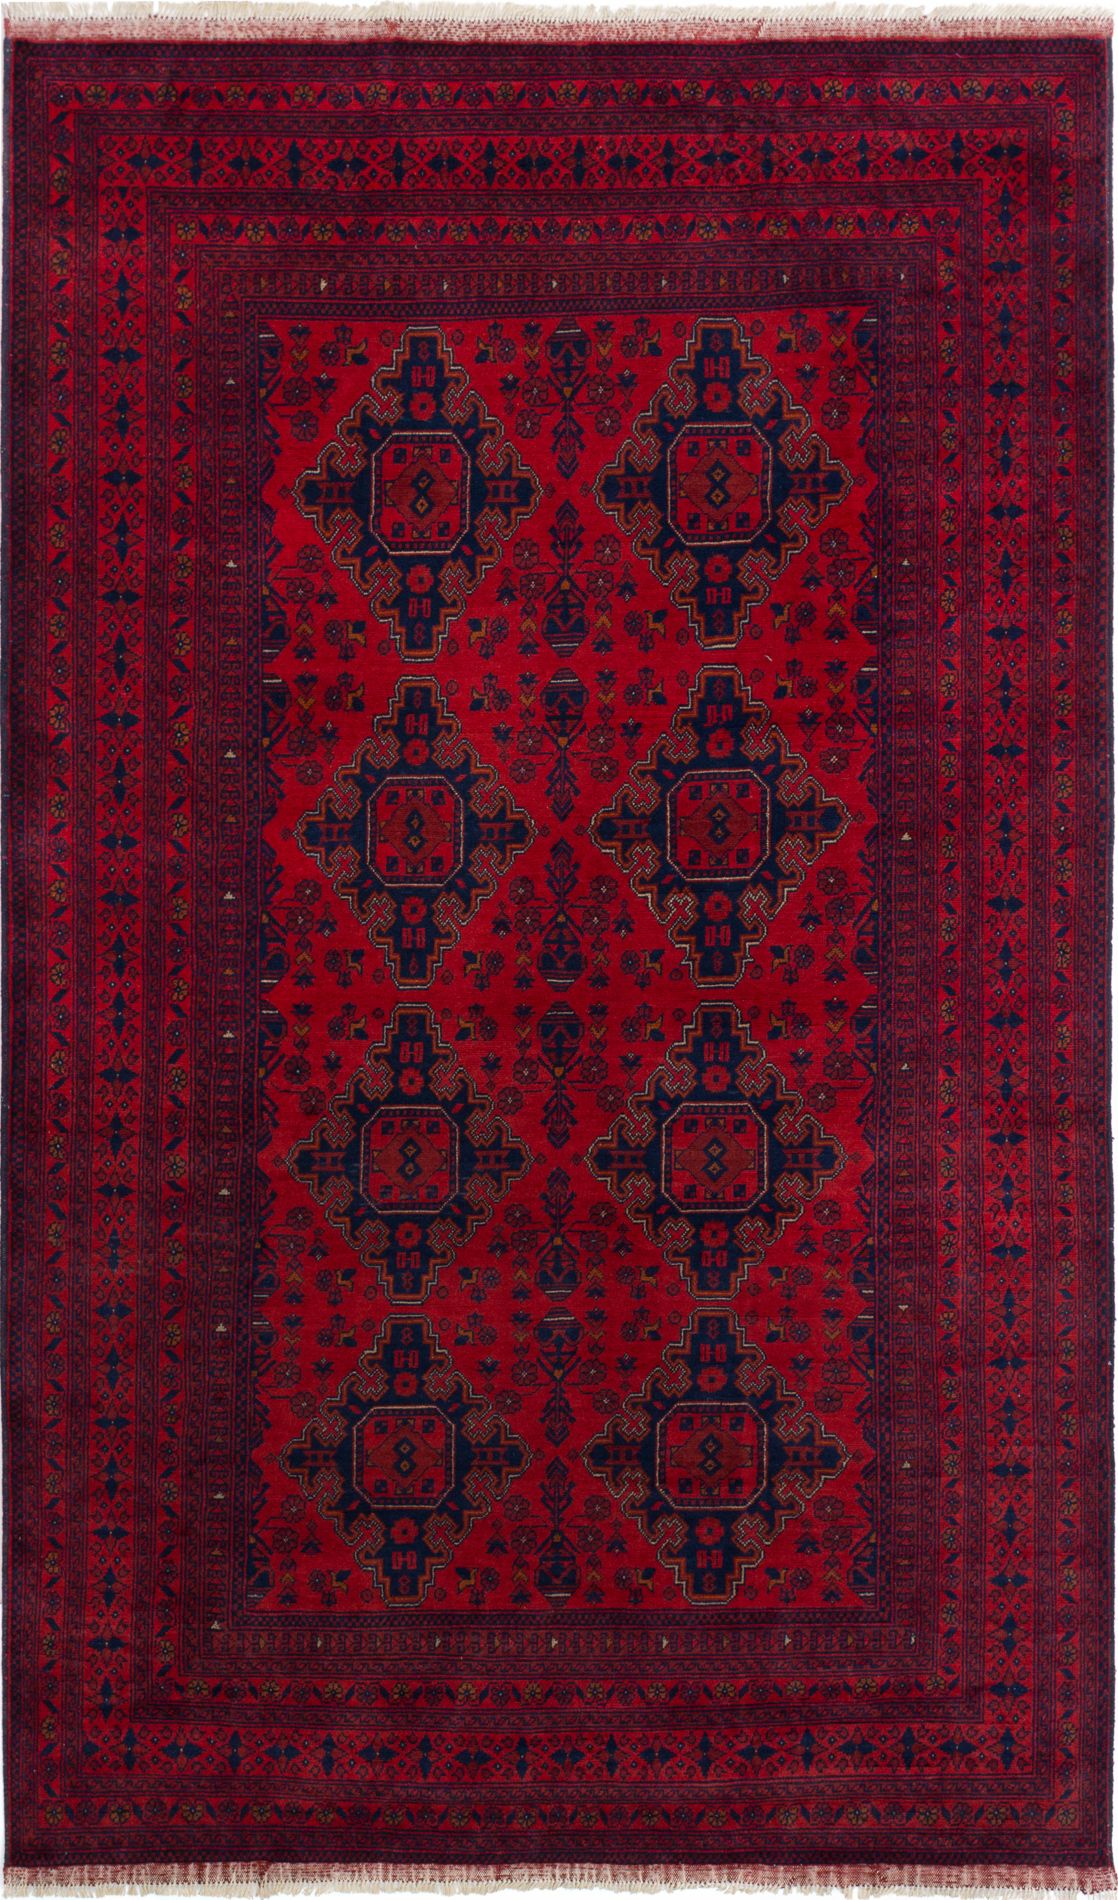 Hand-knotted Finest Khal Mohammadi Red Wool Rug 6'5" x 9'11" Size: 6'5" x 9'11"  